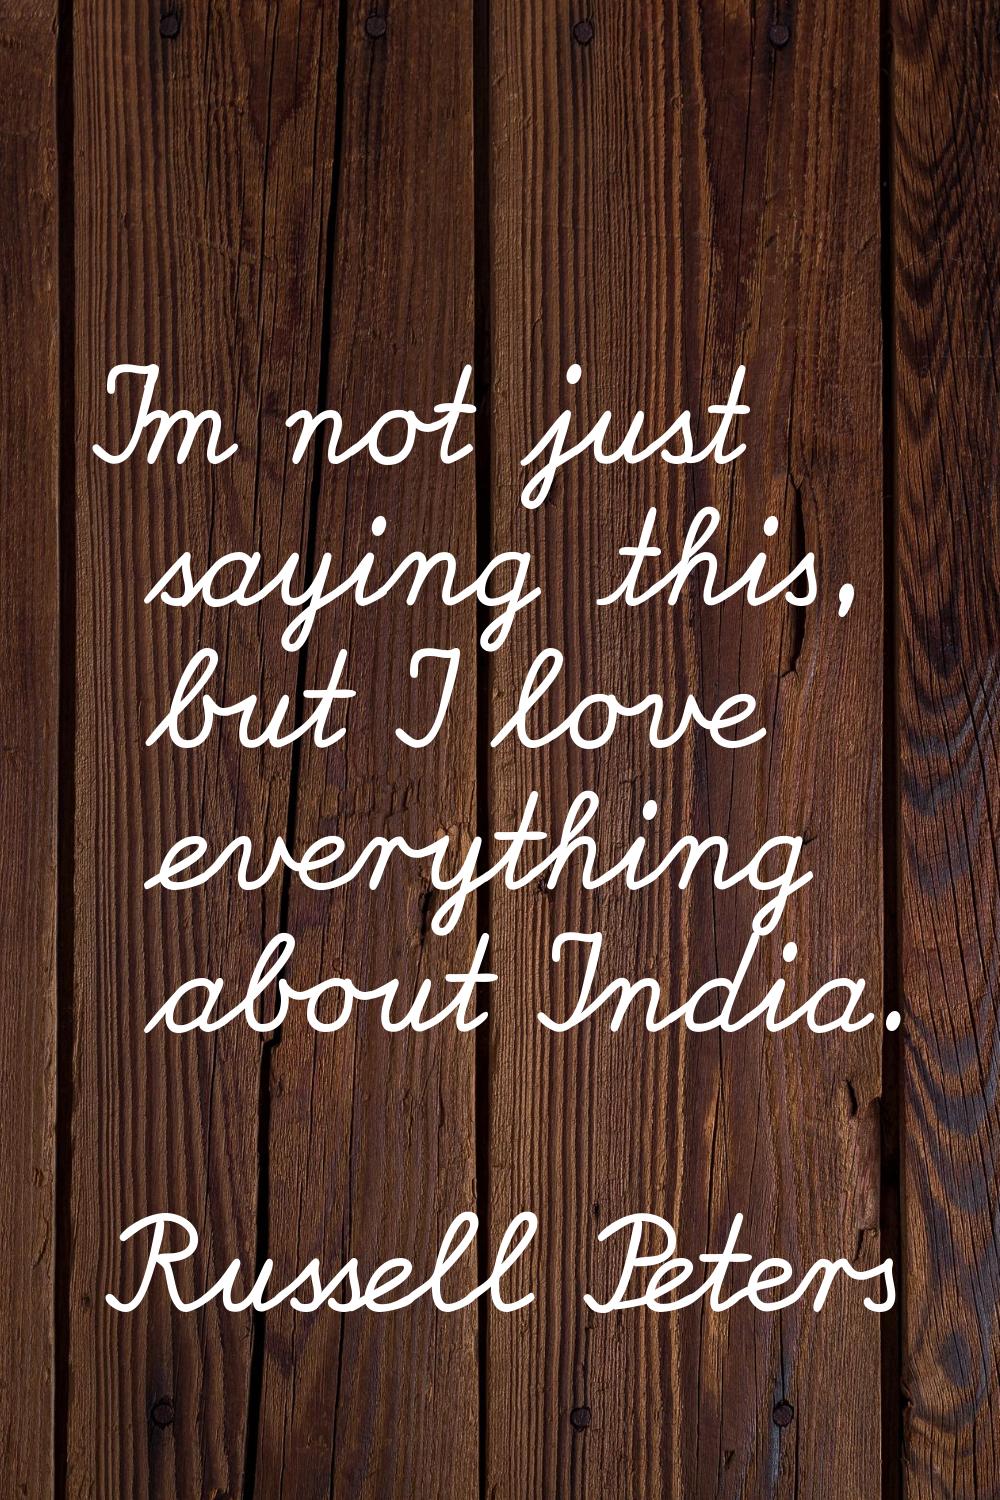 I'm not just saying this, but I love everything about India.